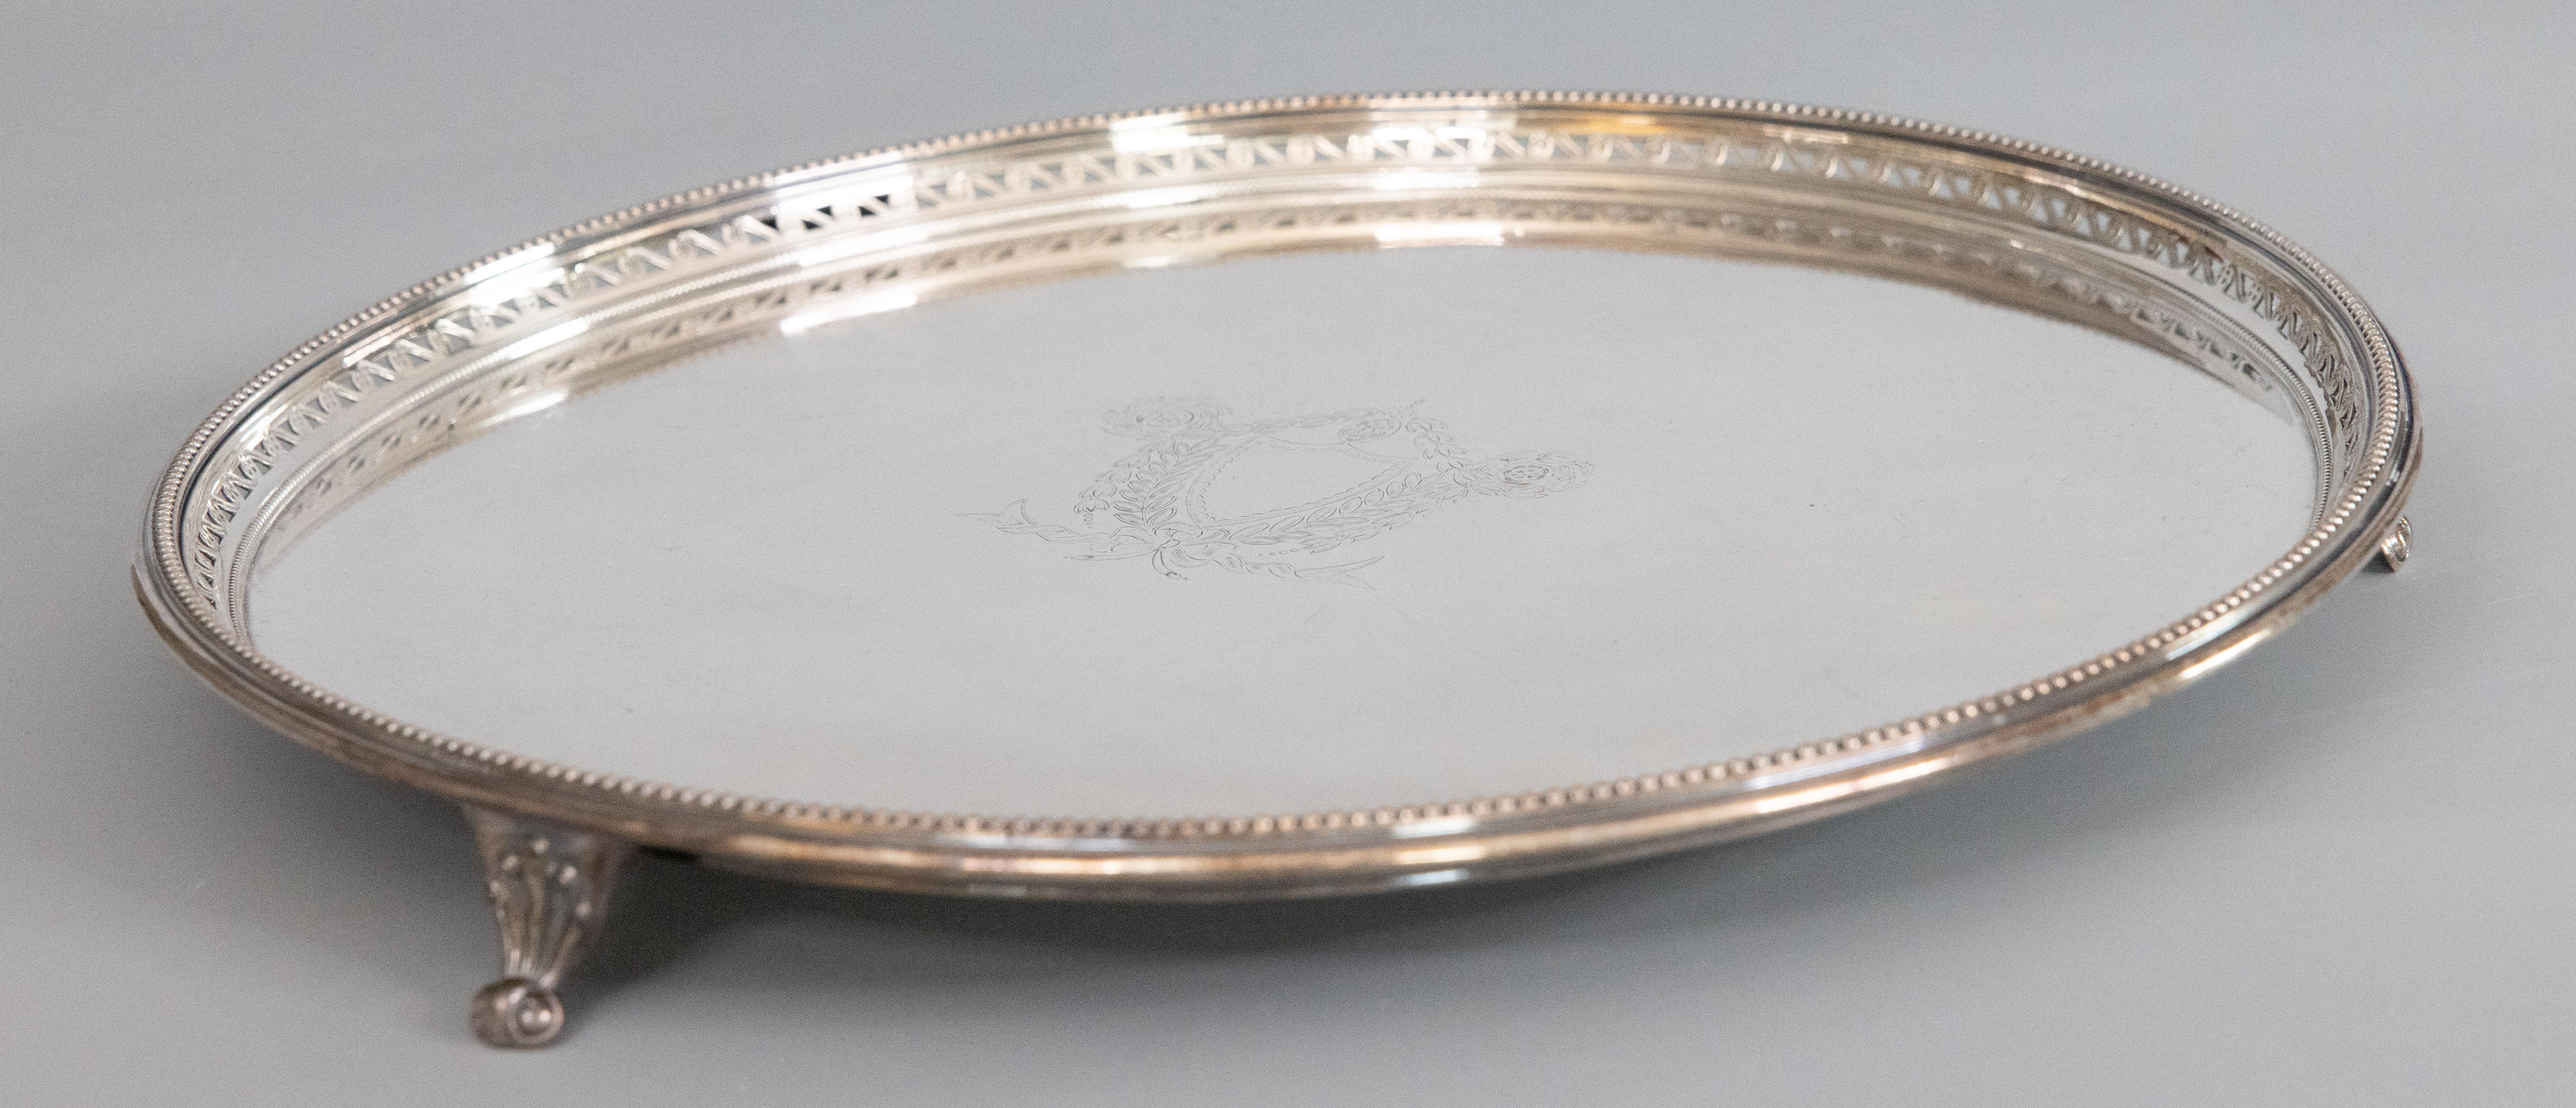 what is a salver plate